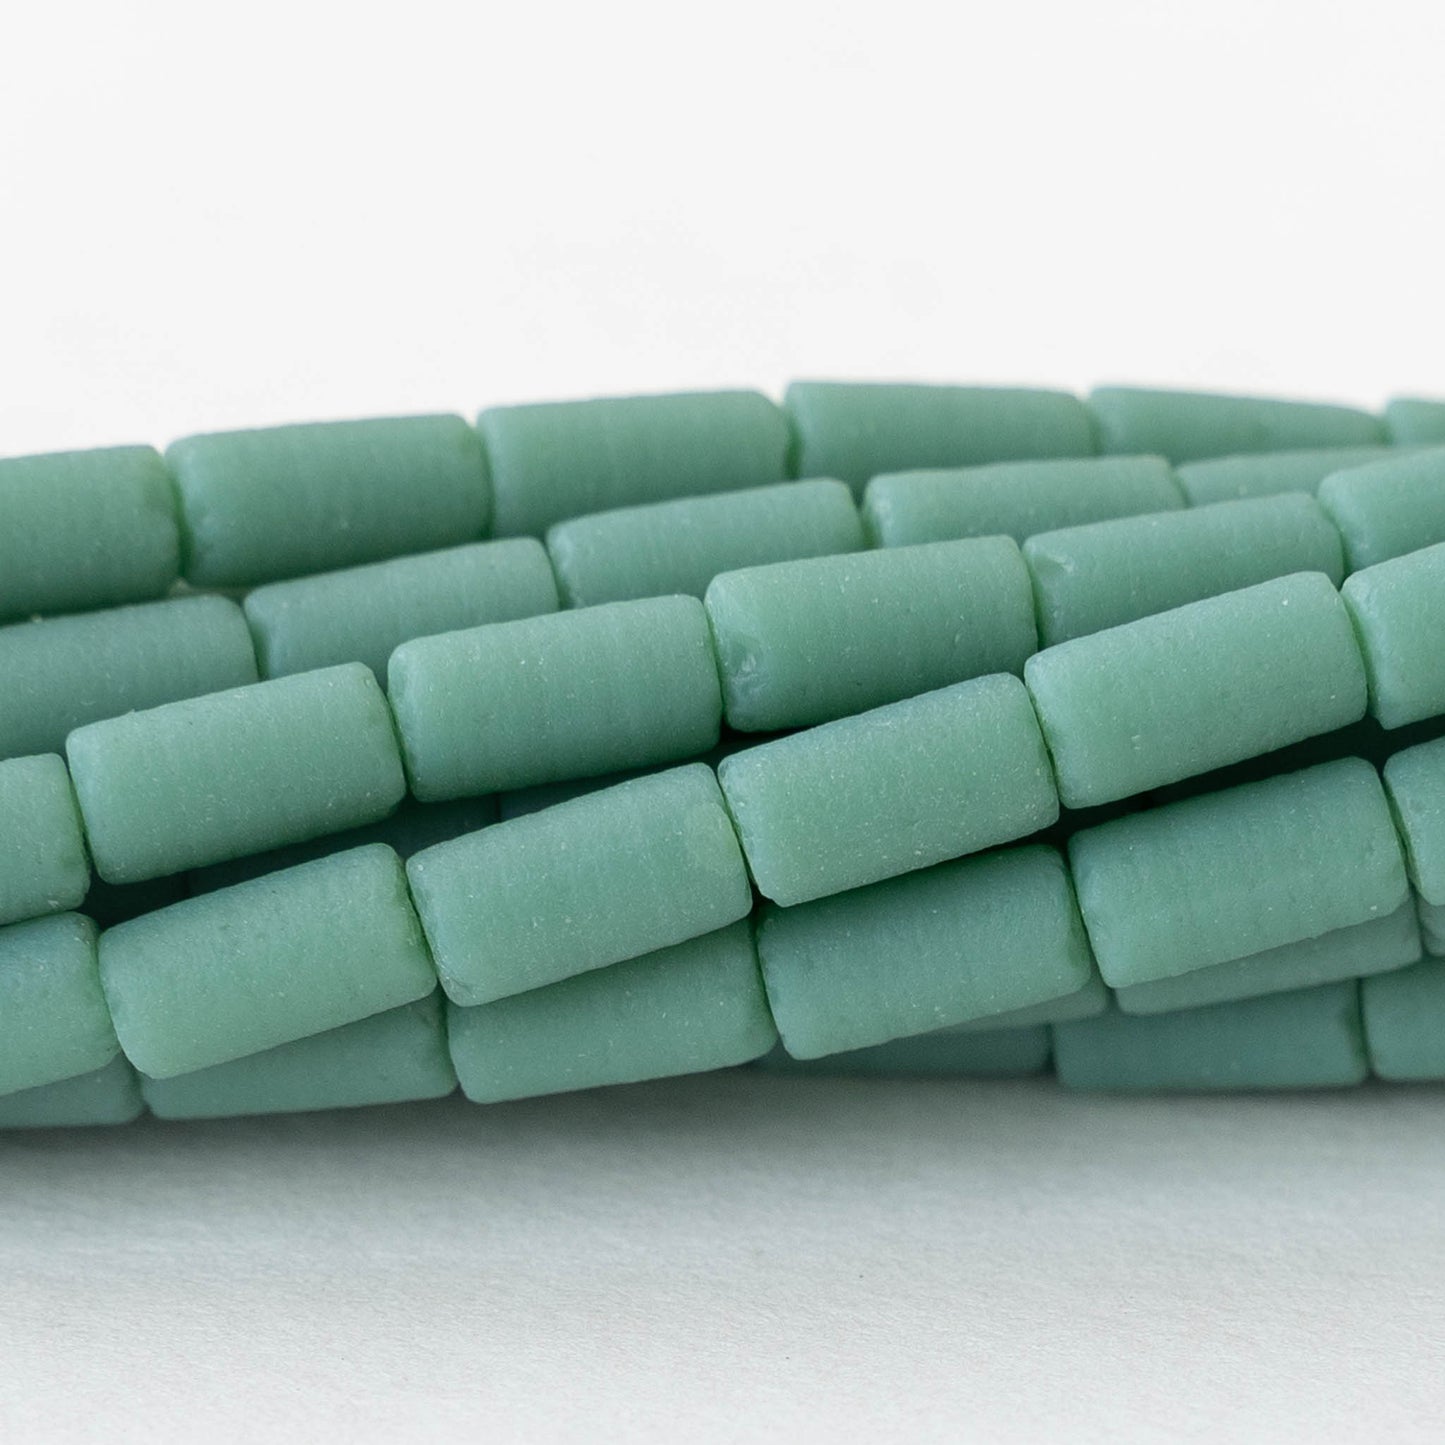 4x9mm Frosted Glass Tube Beads - Opaque Seafoam - 48 Beads